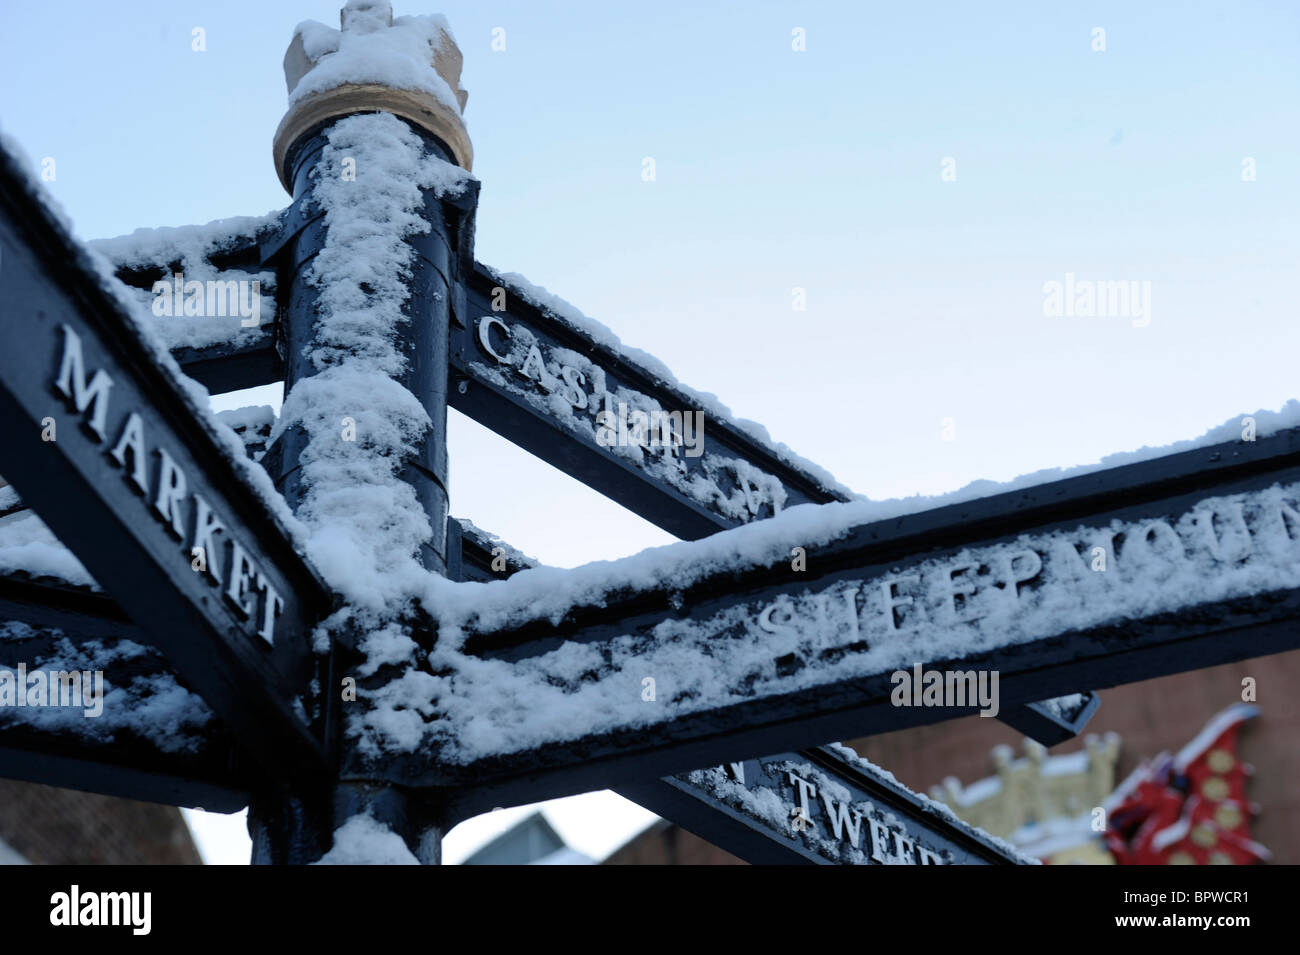 Signpost for historic sites in Carlisle covered in winter snow Stock Photo